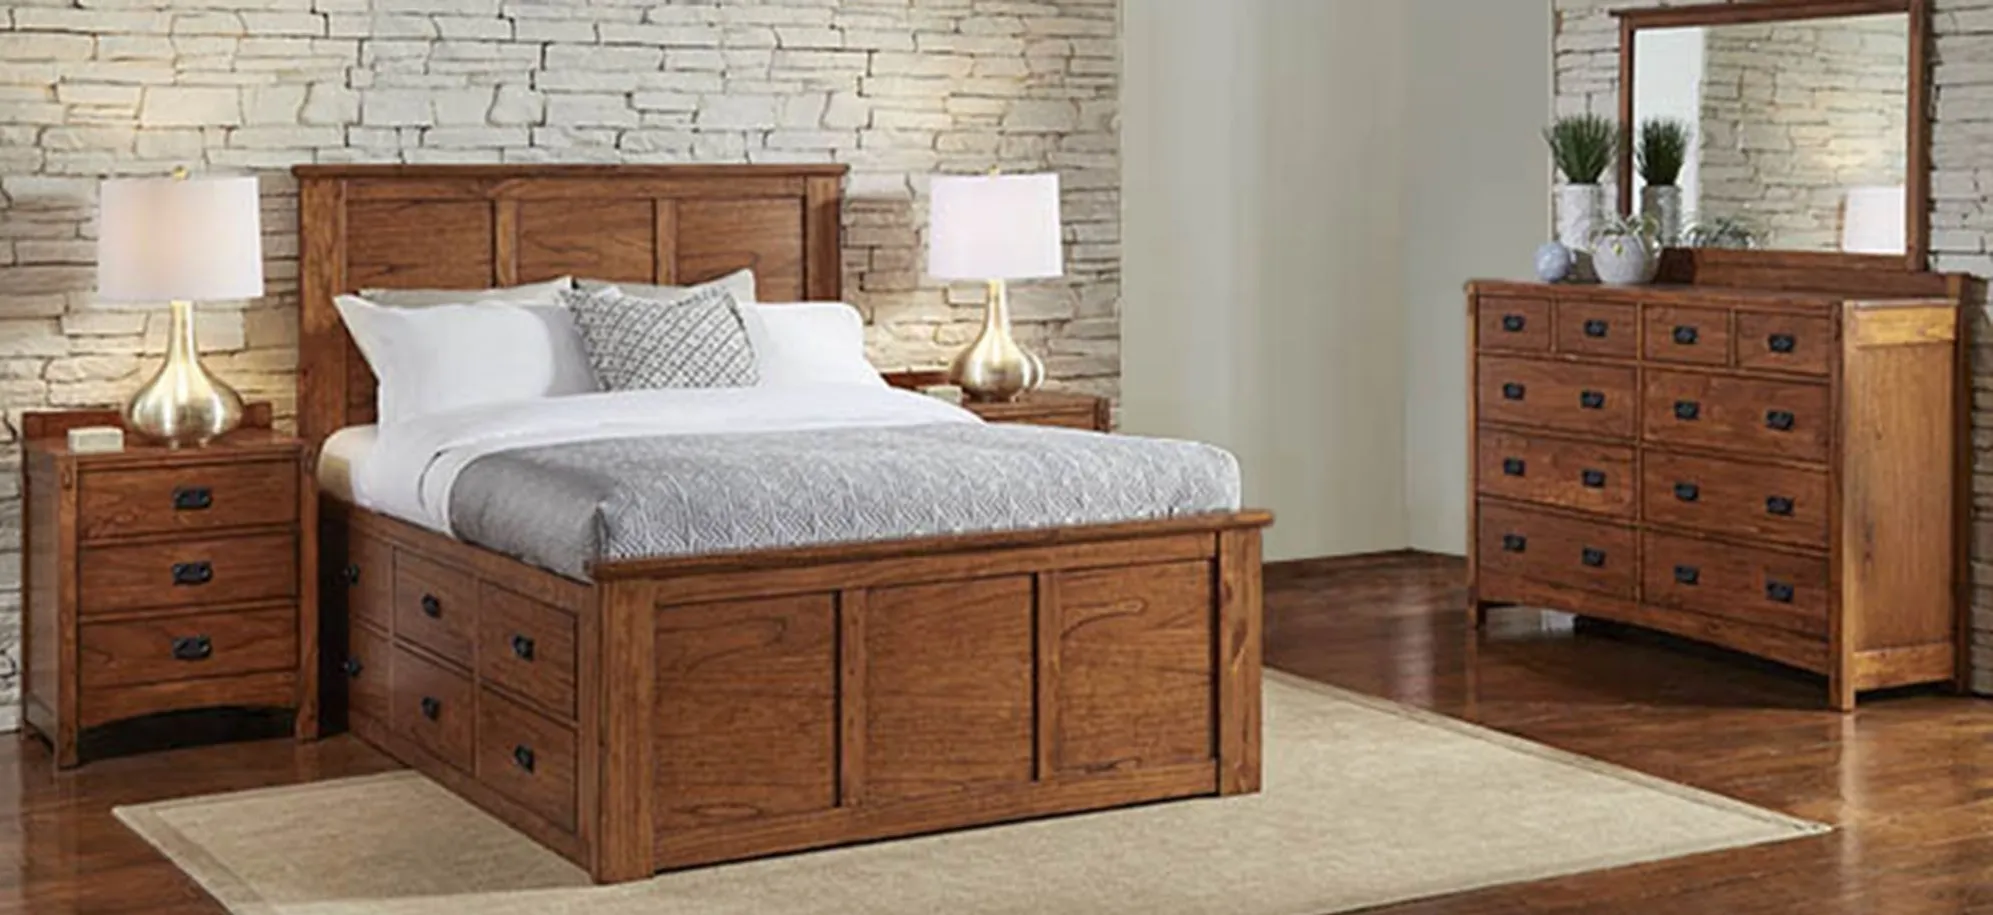 Mission Hill 4-pc. Bedroom Set w/Storage Bed in Harvest by A-America